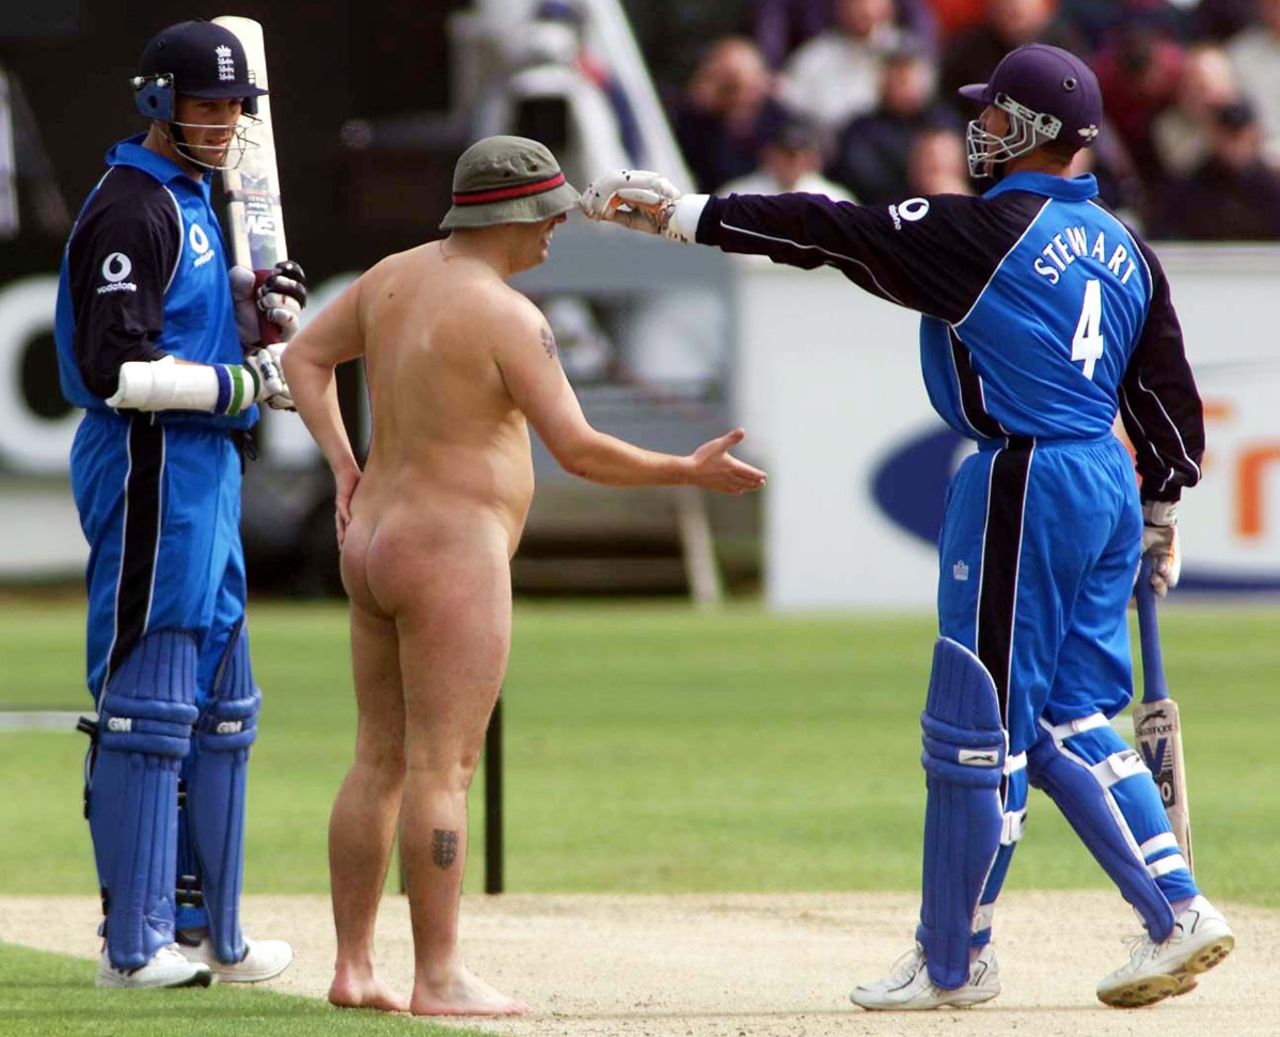 A streaker greets Alec Stewart while Marcus Trescothick watches, England v Zimbabwe, Chester-le-Street, July 15, 2000